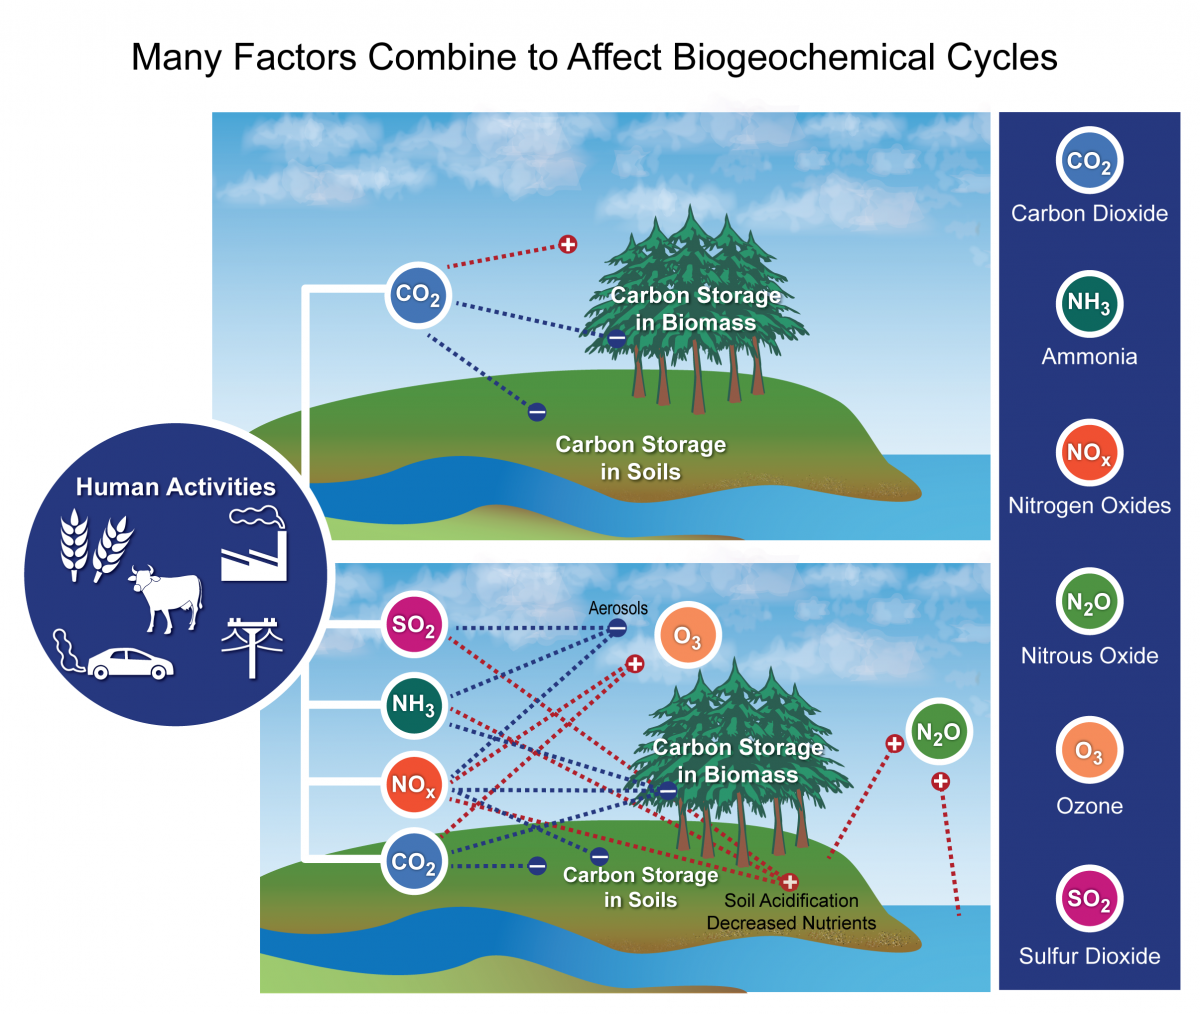 This figure from the National Climate Assessment (2014) depicts different biogeochemical cycles, including the carbon cycle, as influenced by different factors. 'The top panel shows the impact of the alteration of the carbon cycle alone on radiative forcing. The bottom panel shows the impacts of the alteration of carbon, nitrogen, and sulfur cycles on radiative forcing. SO2 and NH3 increase aerosols and decrease radiative forcing. NH3 is likely to increase plant biomass, and consequently decrease forcing. NOx is likely to increase the formation of tropospheric ozone (O3) and increase radiative forcing. Ozone has a negative effect on plant growth/biomass, which might increase radiative forcing. CO2 and NH3 act synergistically to increase plant growth, and therefore decrease radiative forcing. SO2 is likely to reduce plant growth, perhaps through the leaching of soil nutrients, and consequently increase radiative forcing. NOx is likely to reduce plant growth directly and through the leaching of soil nutrients, therefore increasing radiative forcing. However, it could act as a fertilizer that would have the opposite effect.' (National Climate Assessment, 2014)